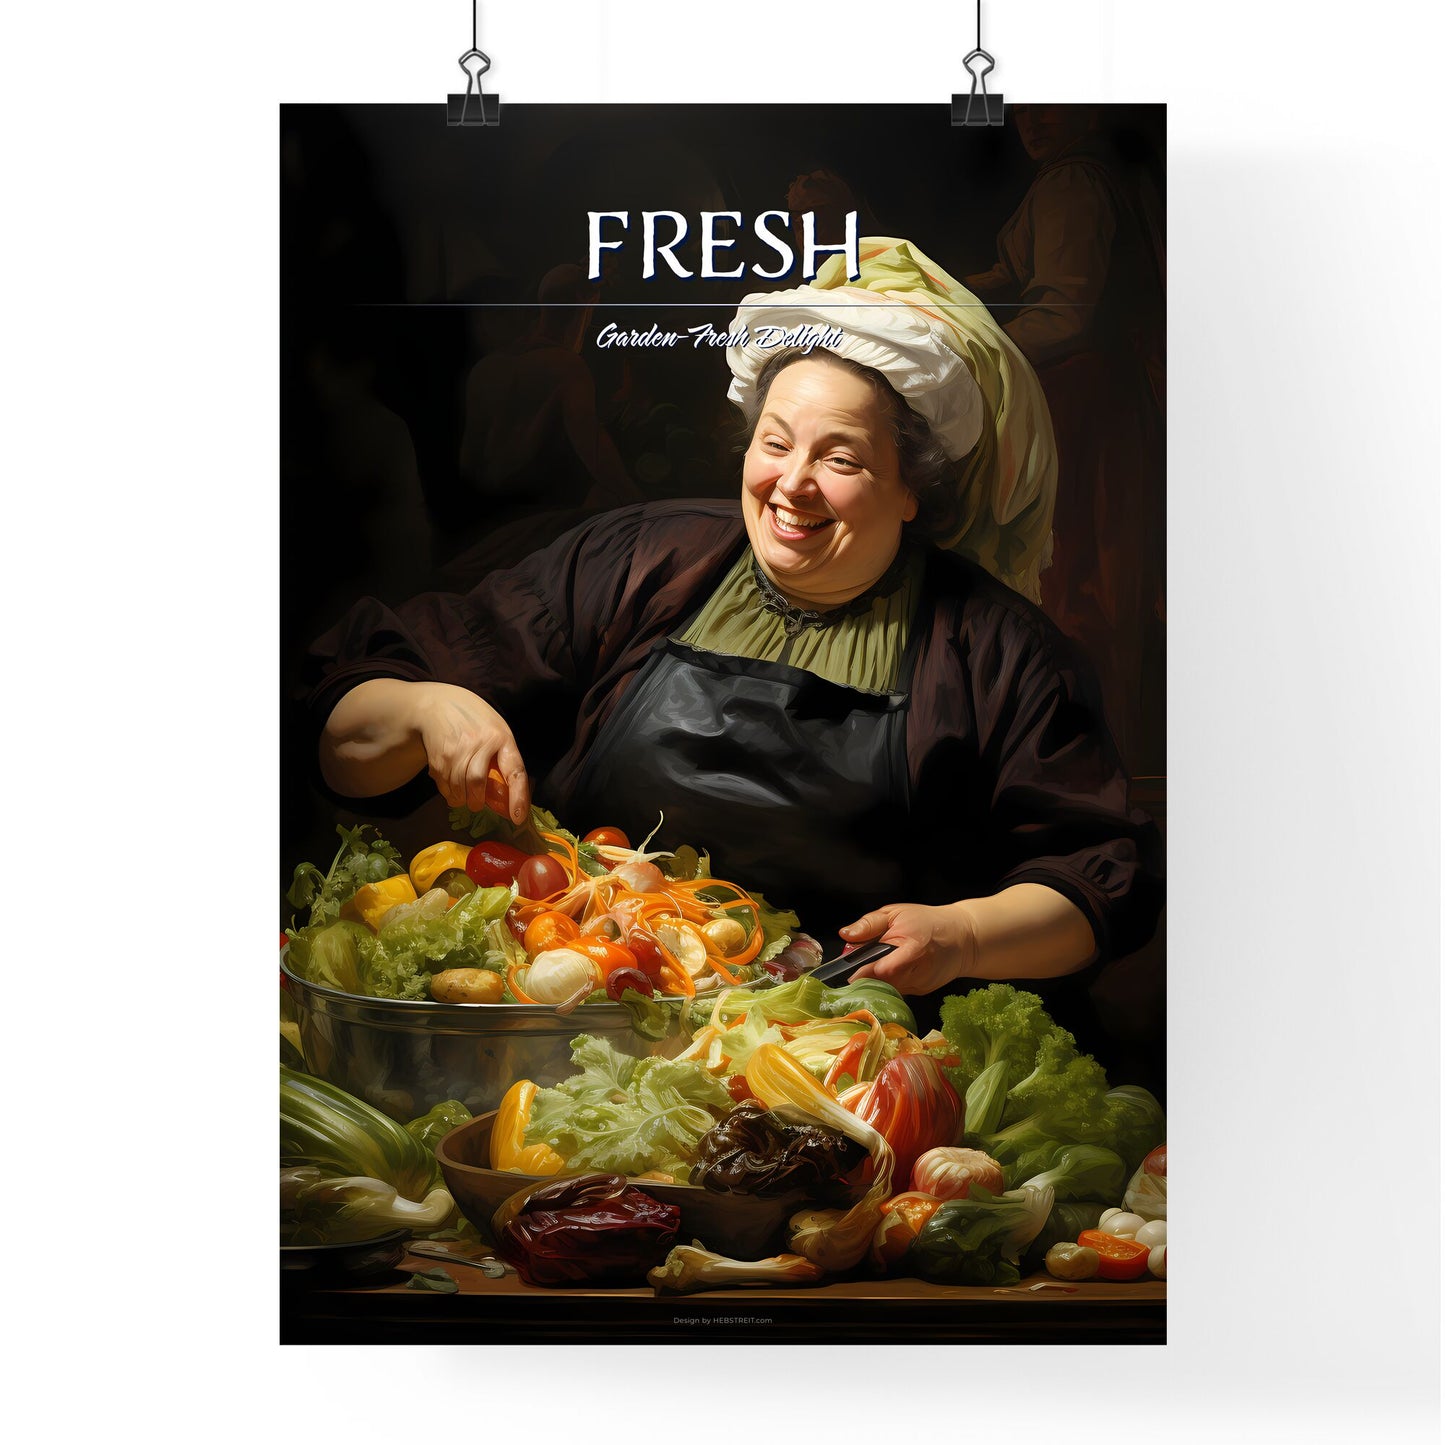 My Mother Makes A Great Salad - A Woman Smiling At A Bowl Of Vegetables Default Title